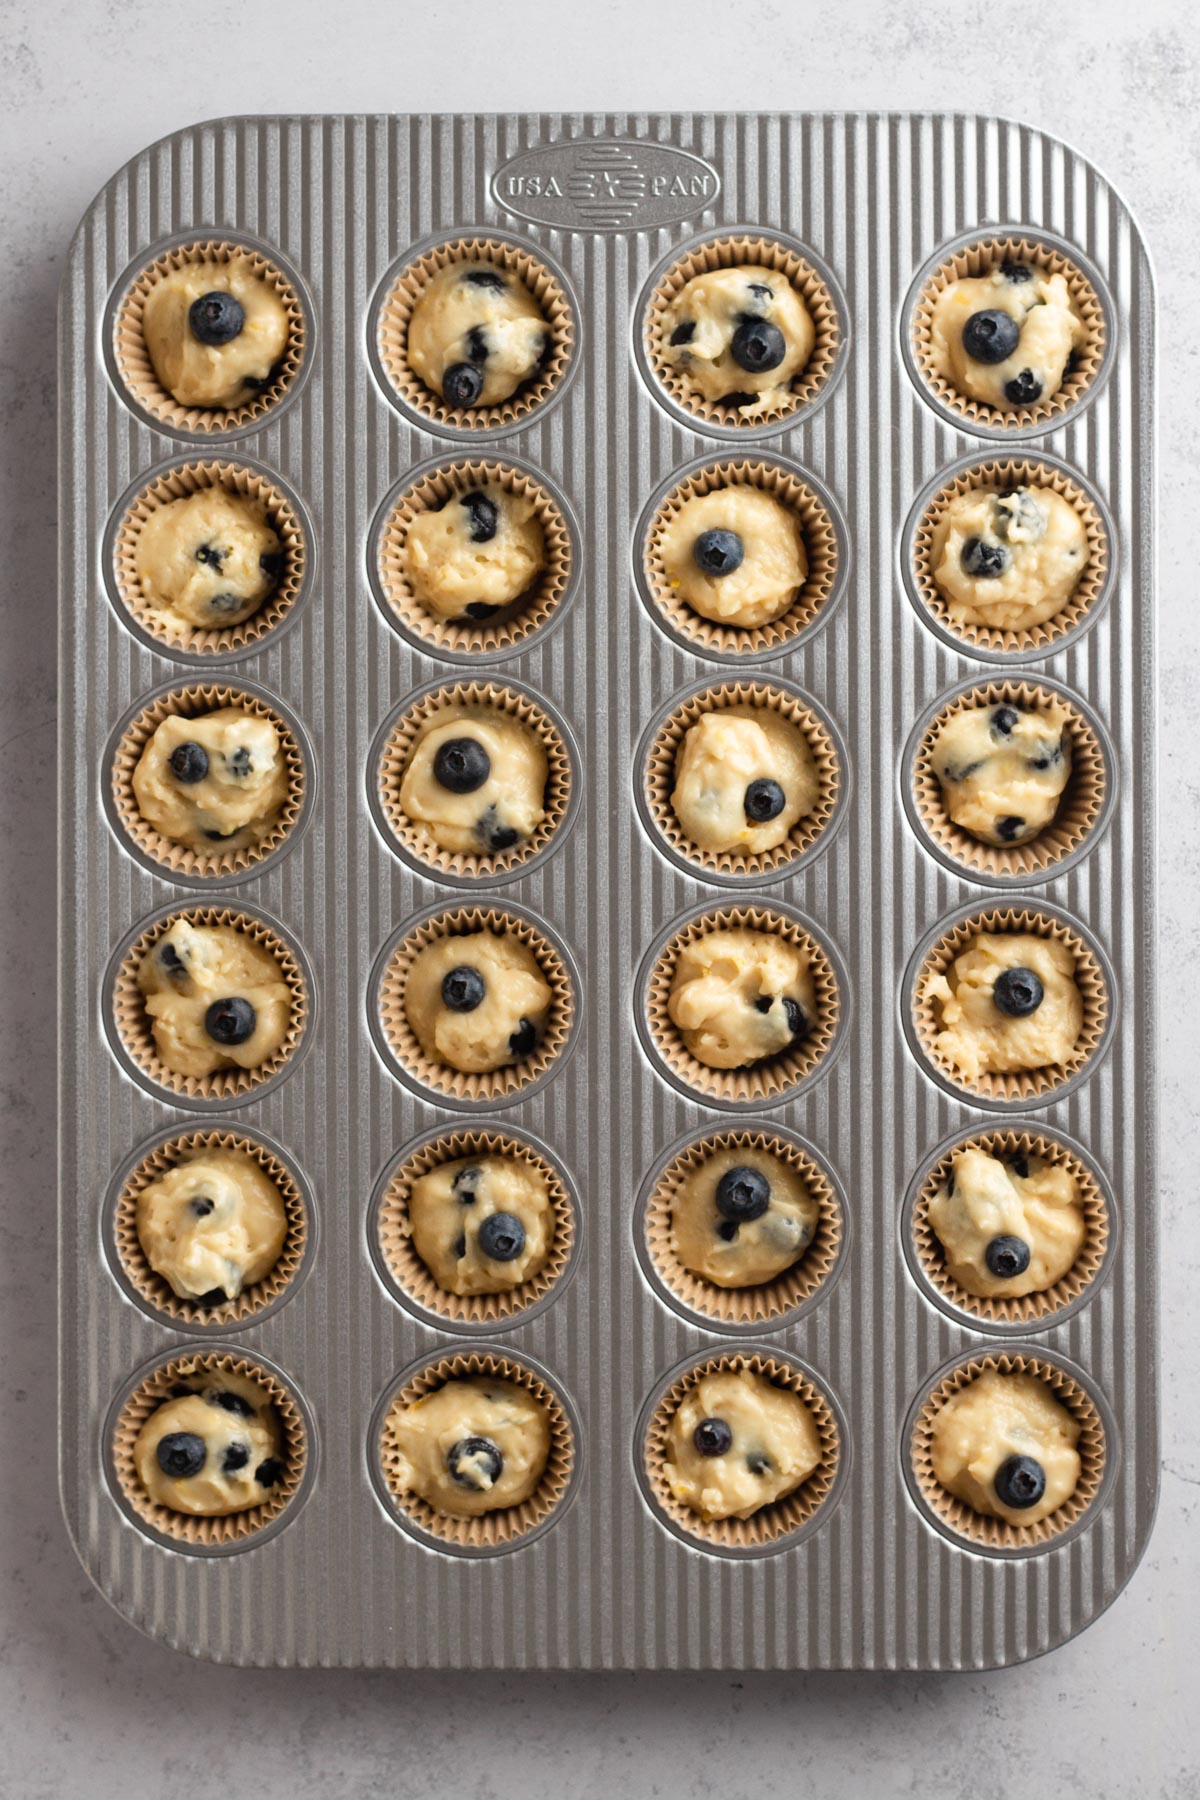 Blueberry muffins batter in paper liners in a metal muffin pan.